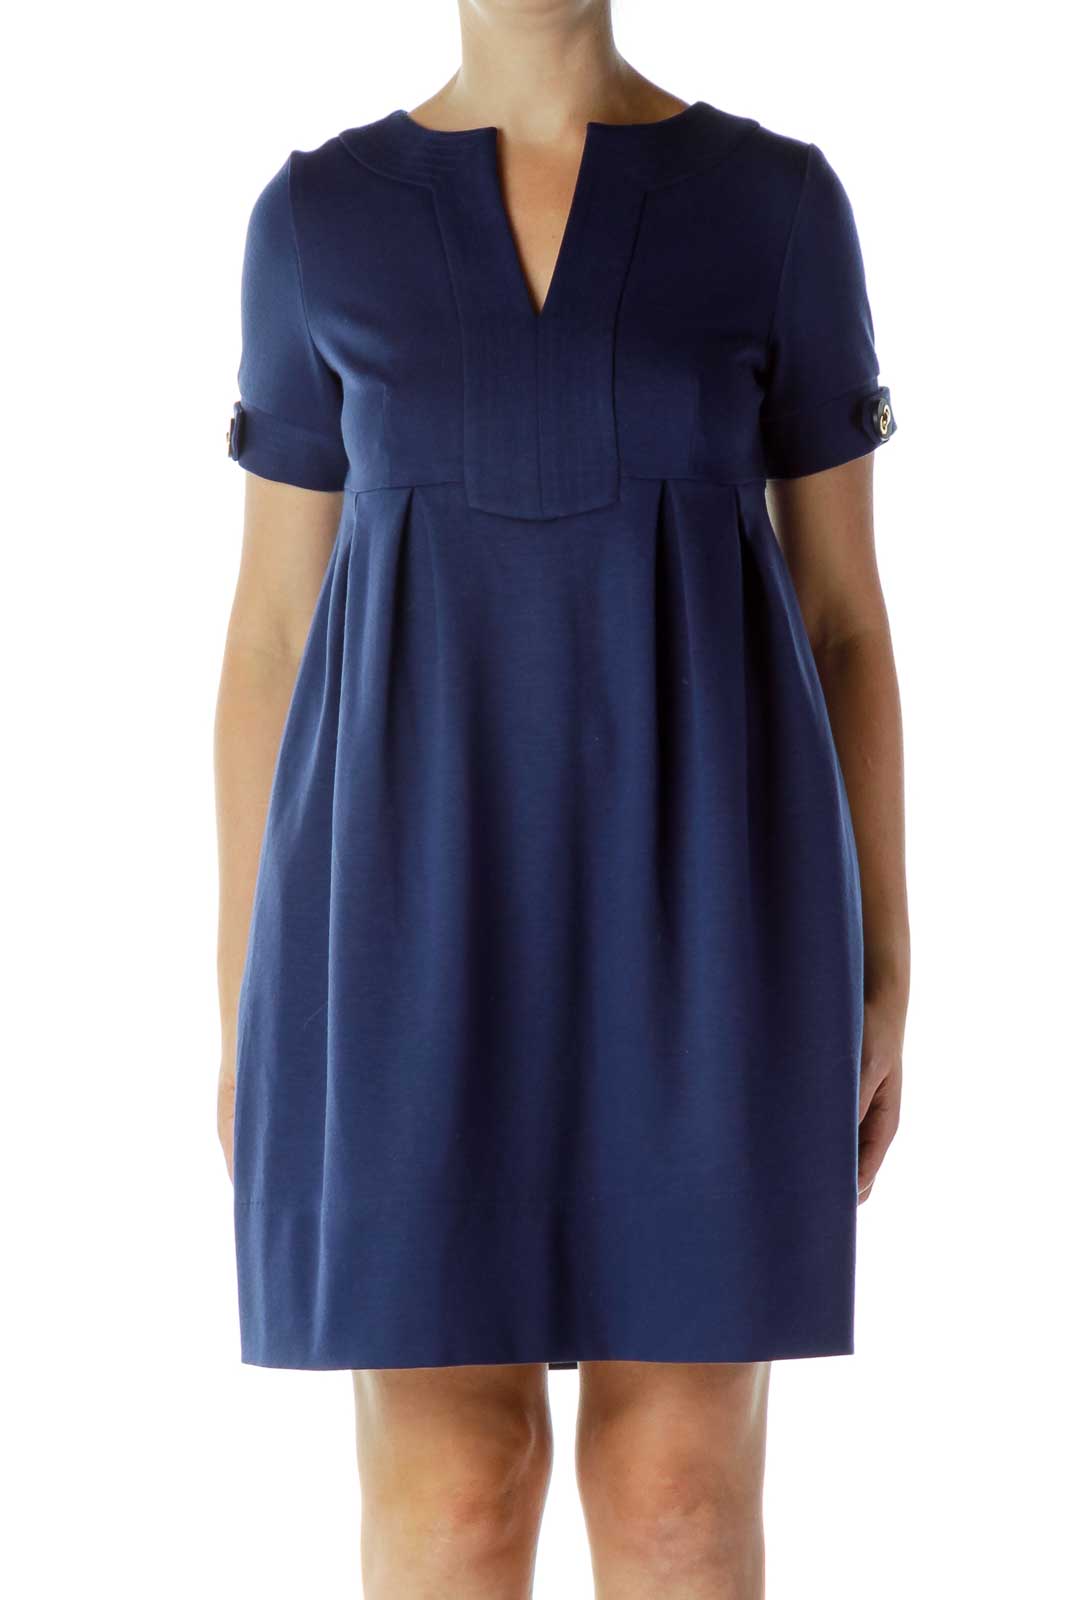 Navy Buttoned Work Dress Front